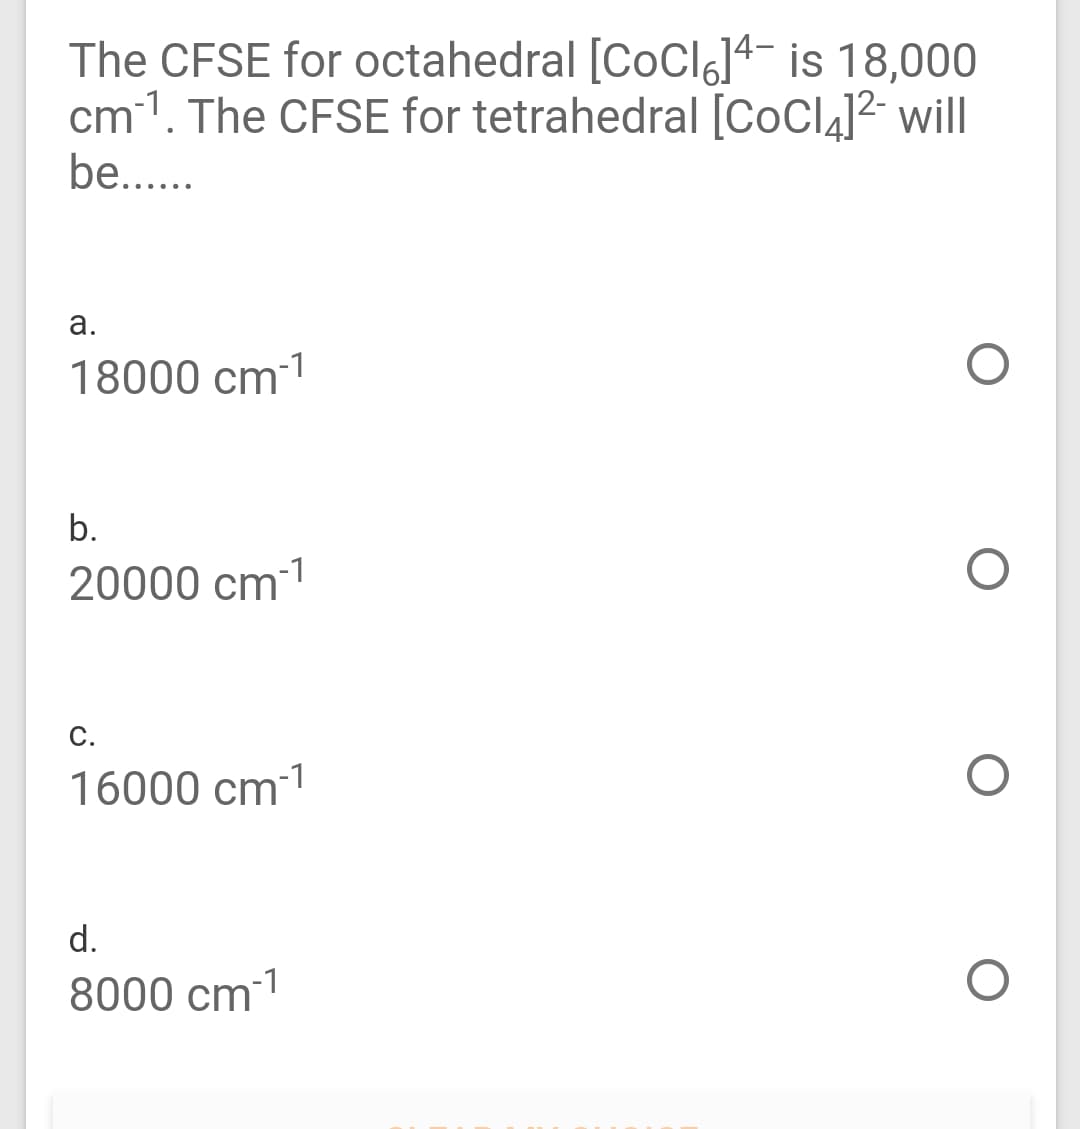 The CFSE for octahedral [CoClg]4¬ is 18,000
cm1. The CFSE for tetrahedral [CoCl4]² will
be...
а.
18000 cm-1
b.
20000 cm-1
С.
16000 cm-1
d.
8000 cm1
